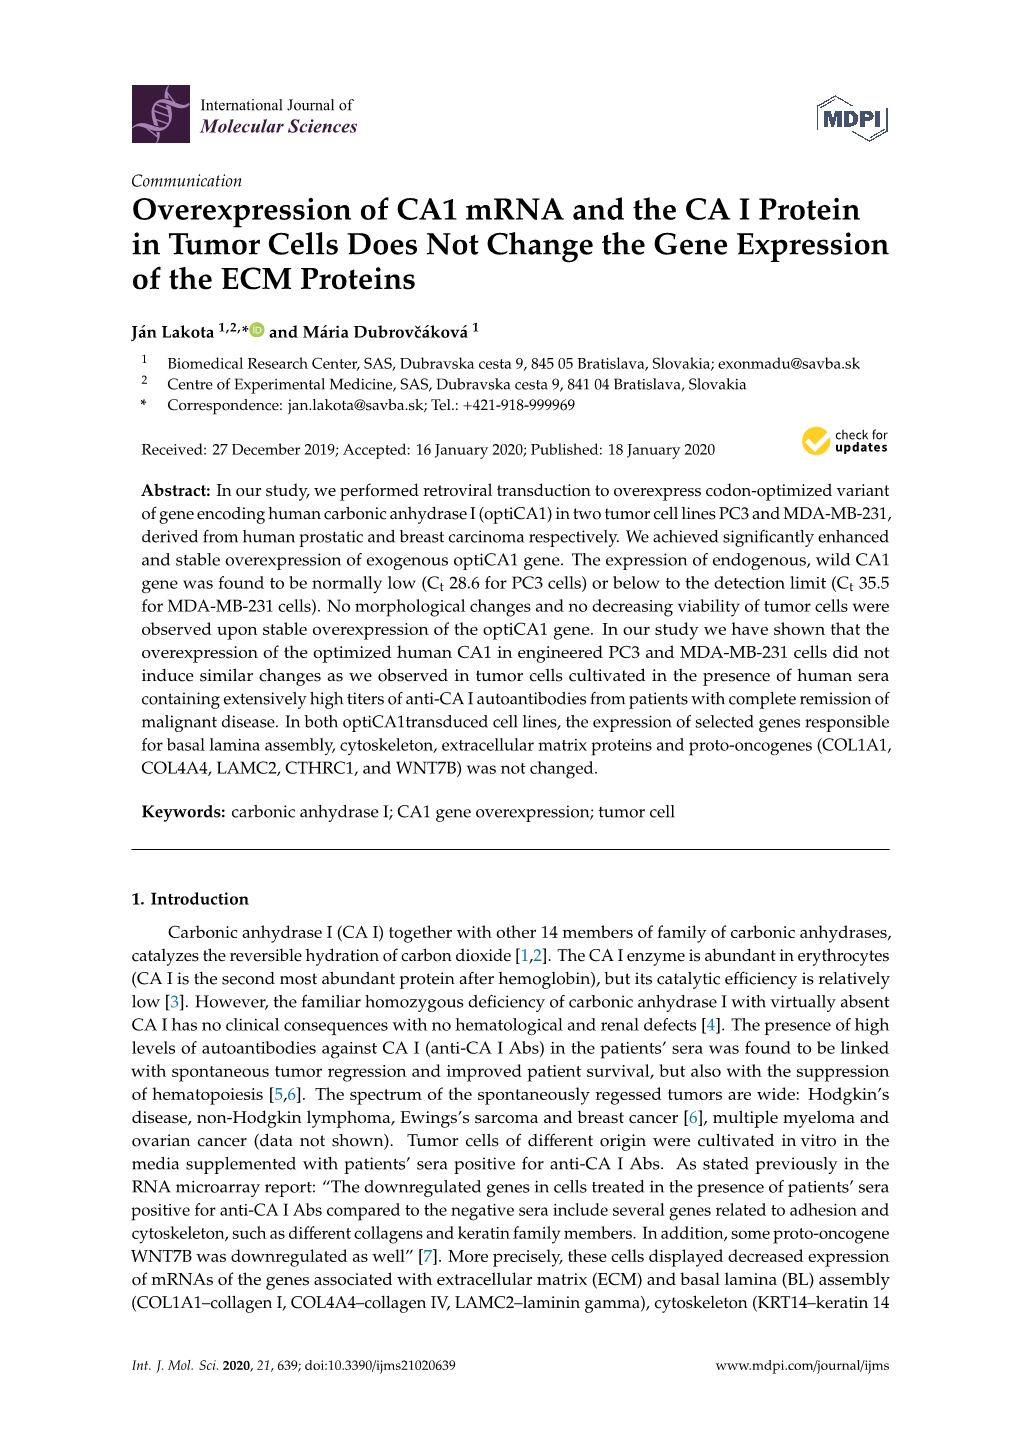 Overexpression of CA1 Mrna and the CA I Protein in Tumor Cells Does Not Change the Gene Expression of the ECM Proteins